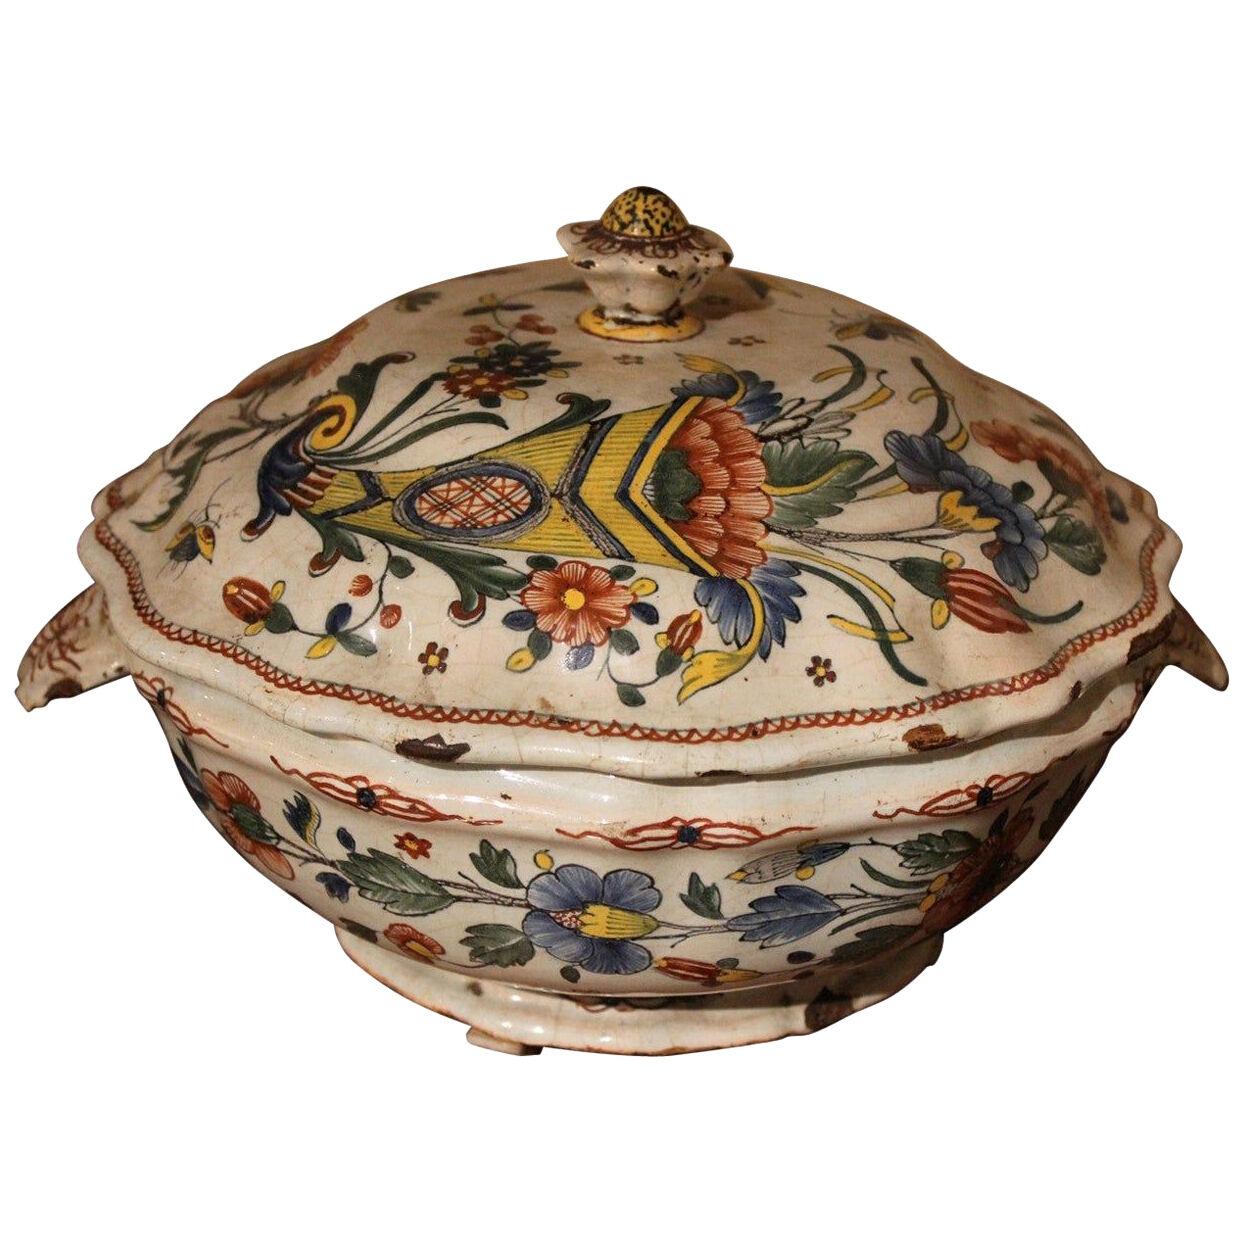 Antique French Faience Lidded Bowl Tureen Hand Painted with Flowers and Insects